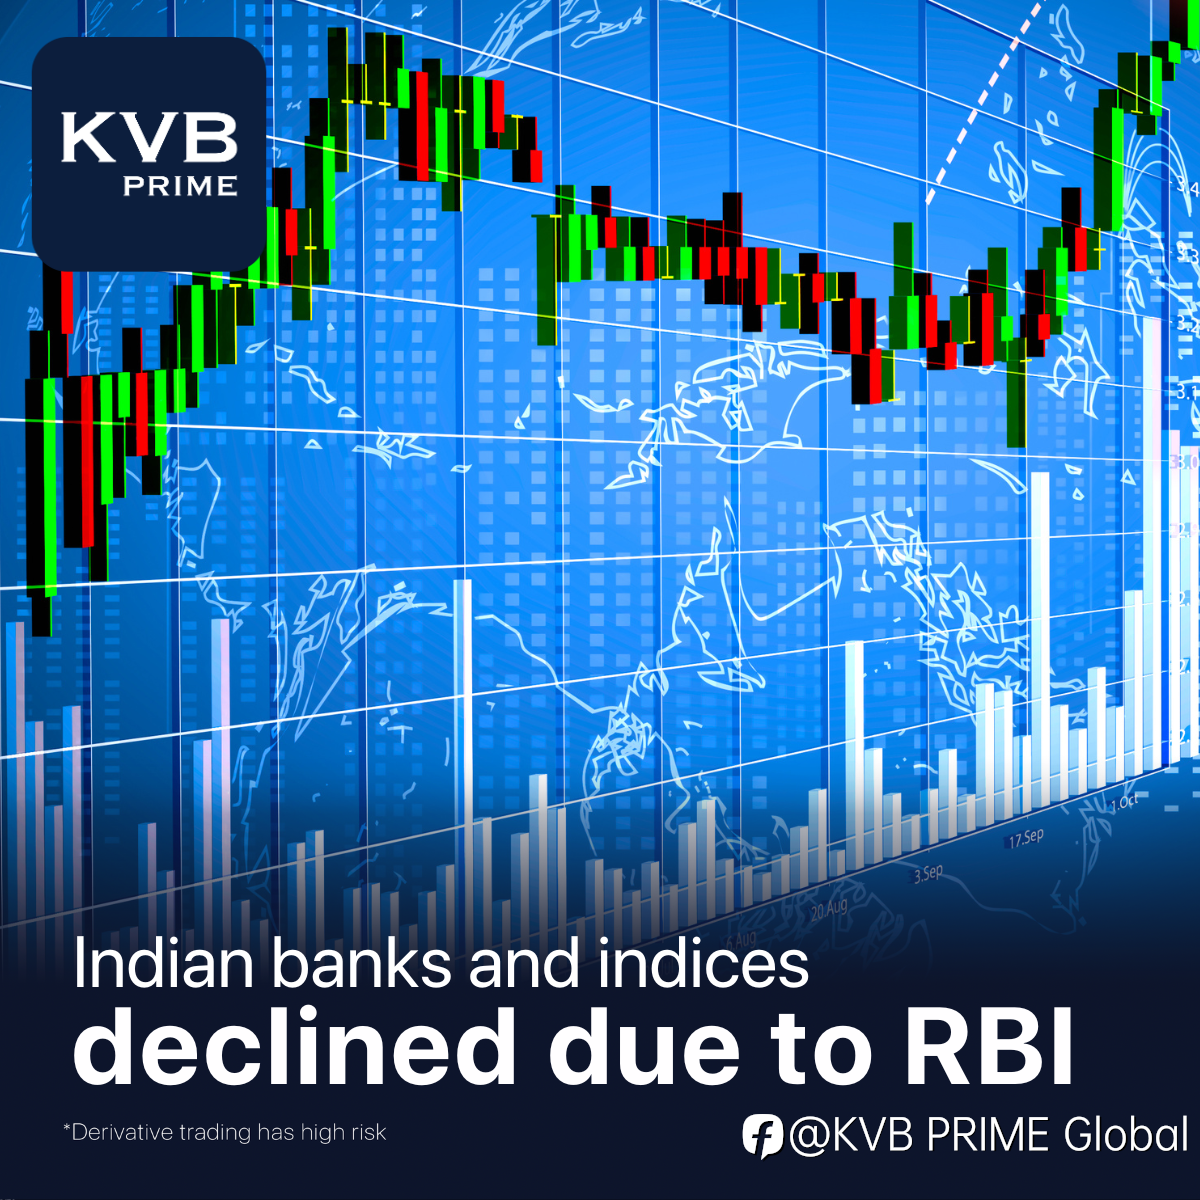 Indian banks and indices declined due to the RBI